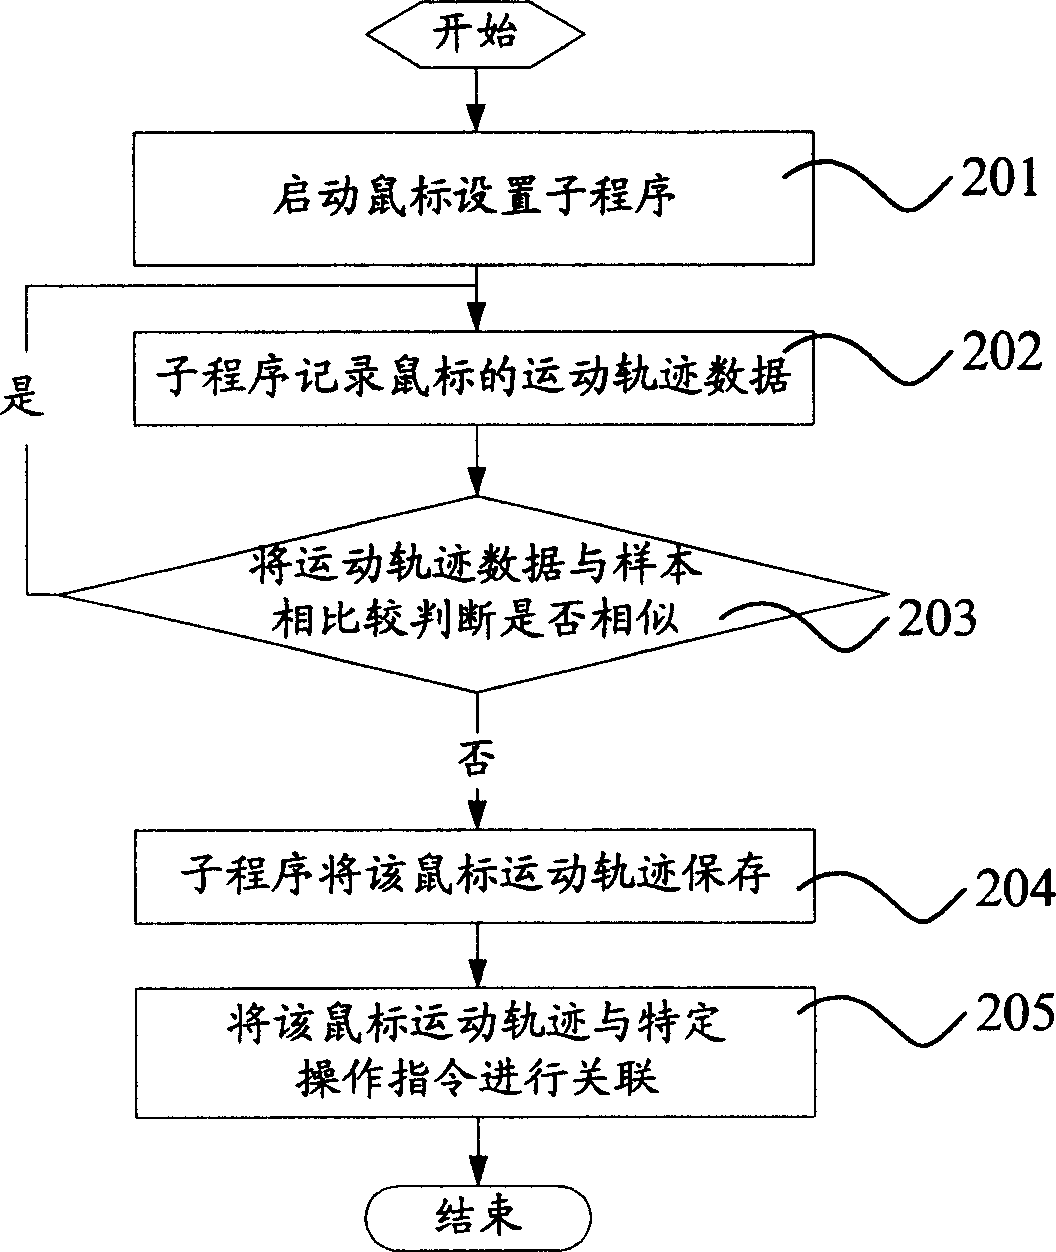 Method for controlling computer software running based on mouse track data